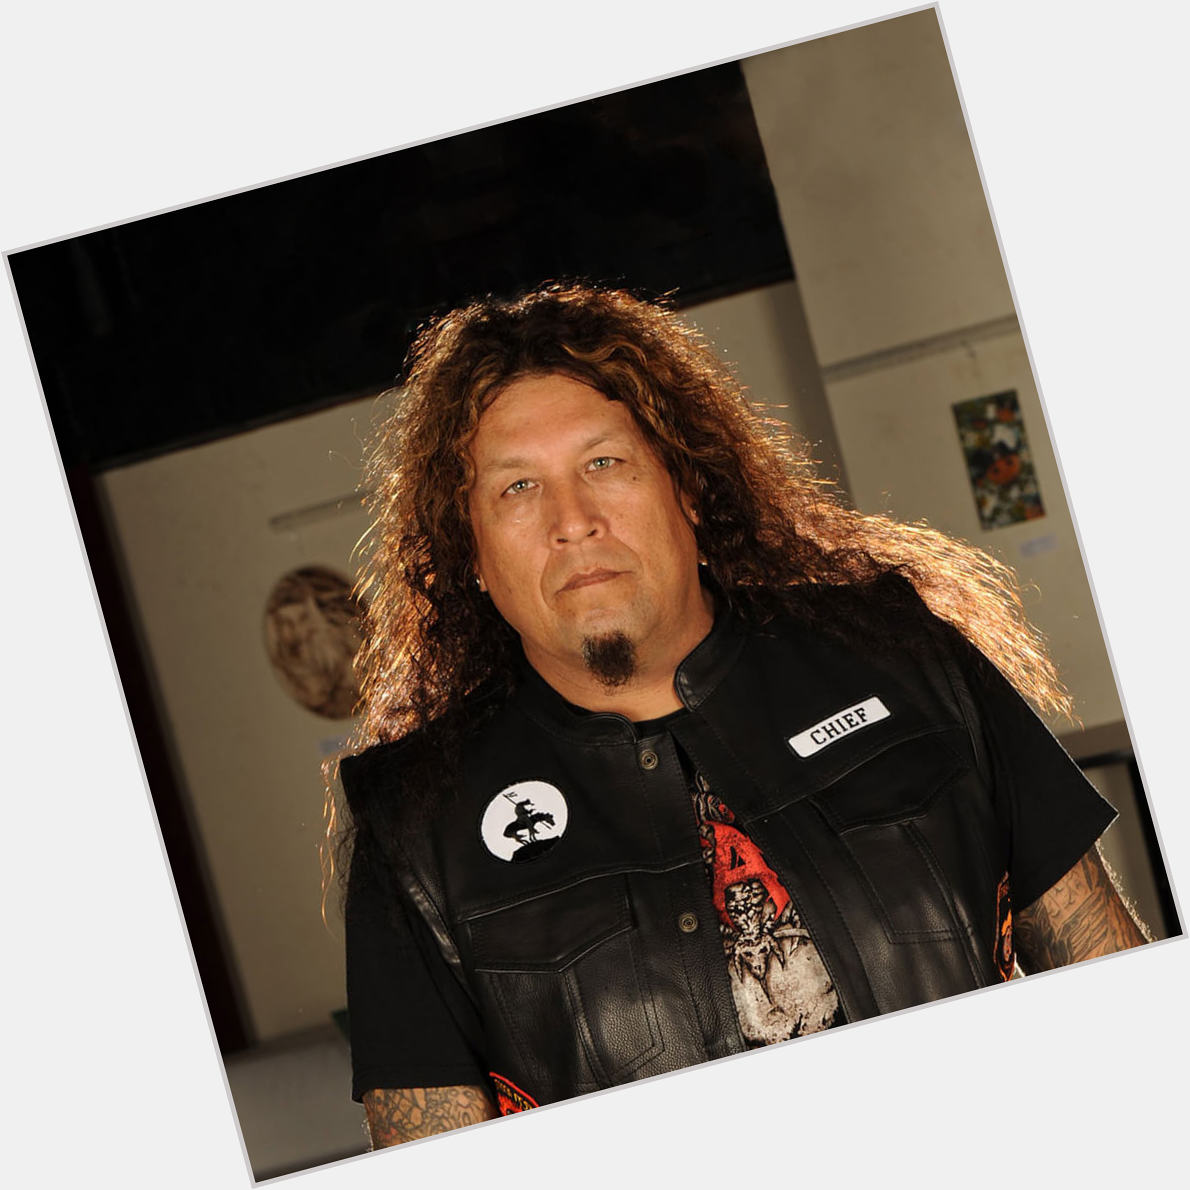 Https://fanpagepress.net/m/Y/young Chuck Billy 0